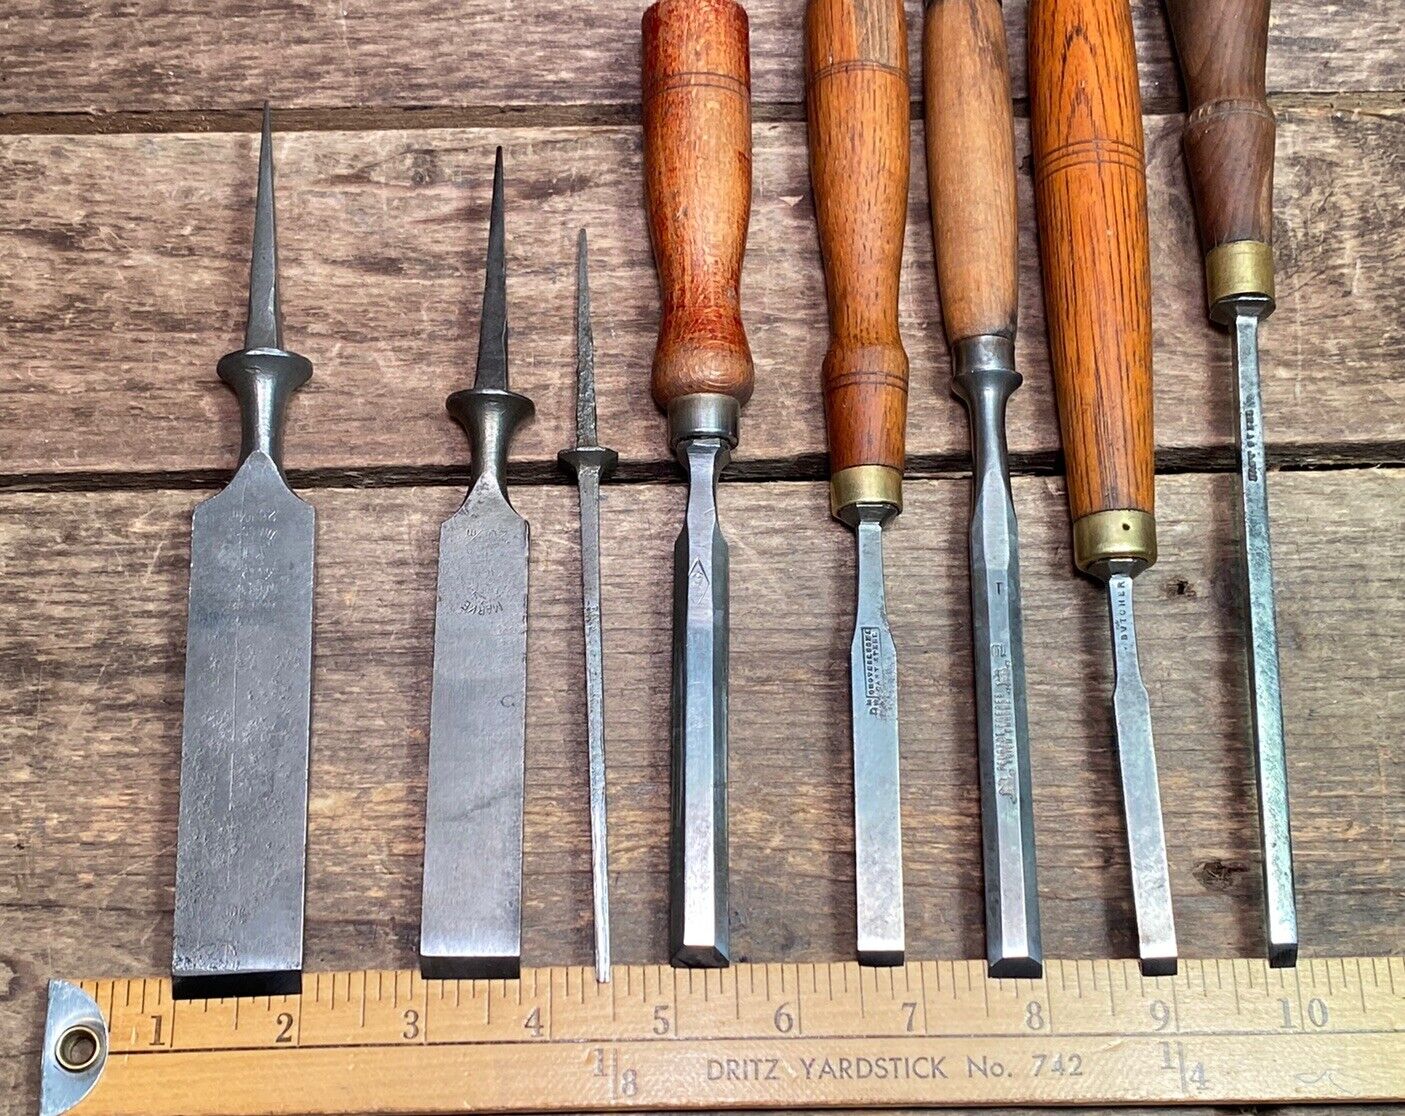 Lot of 8 Vintage/Antique 1/2 Tang Chisels Various Makers & Sizes All Sharpened